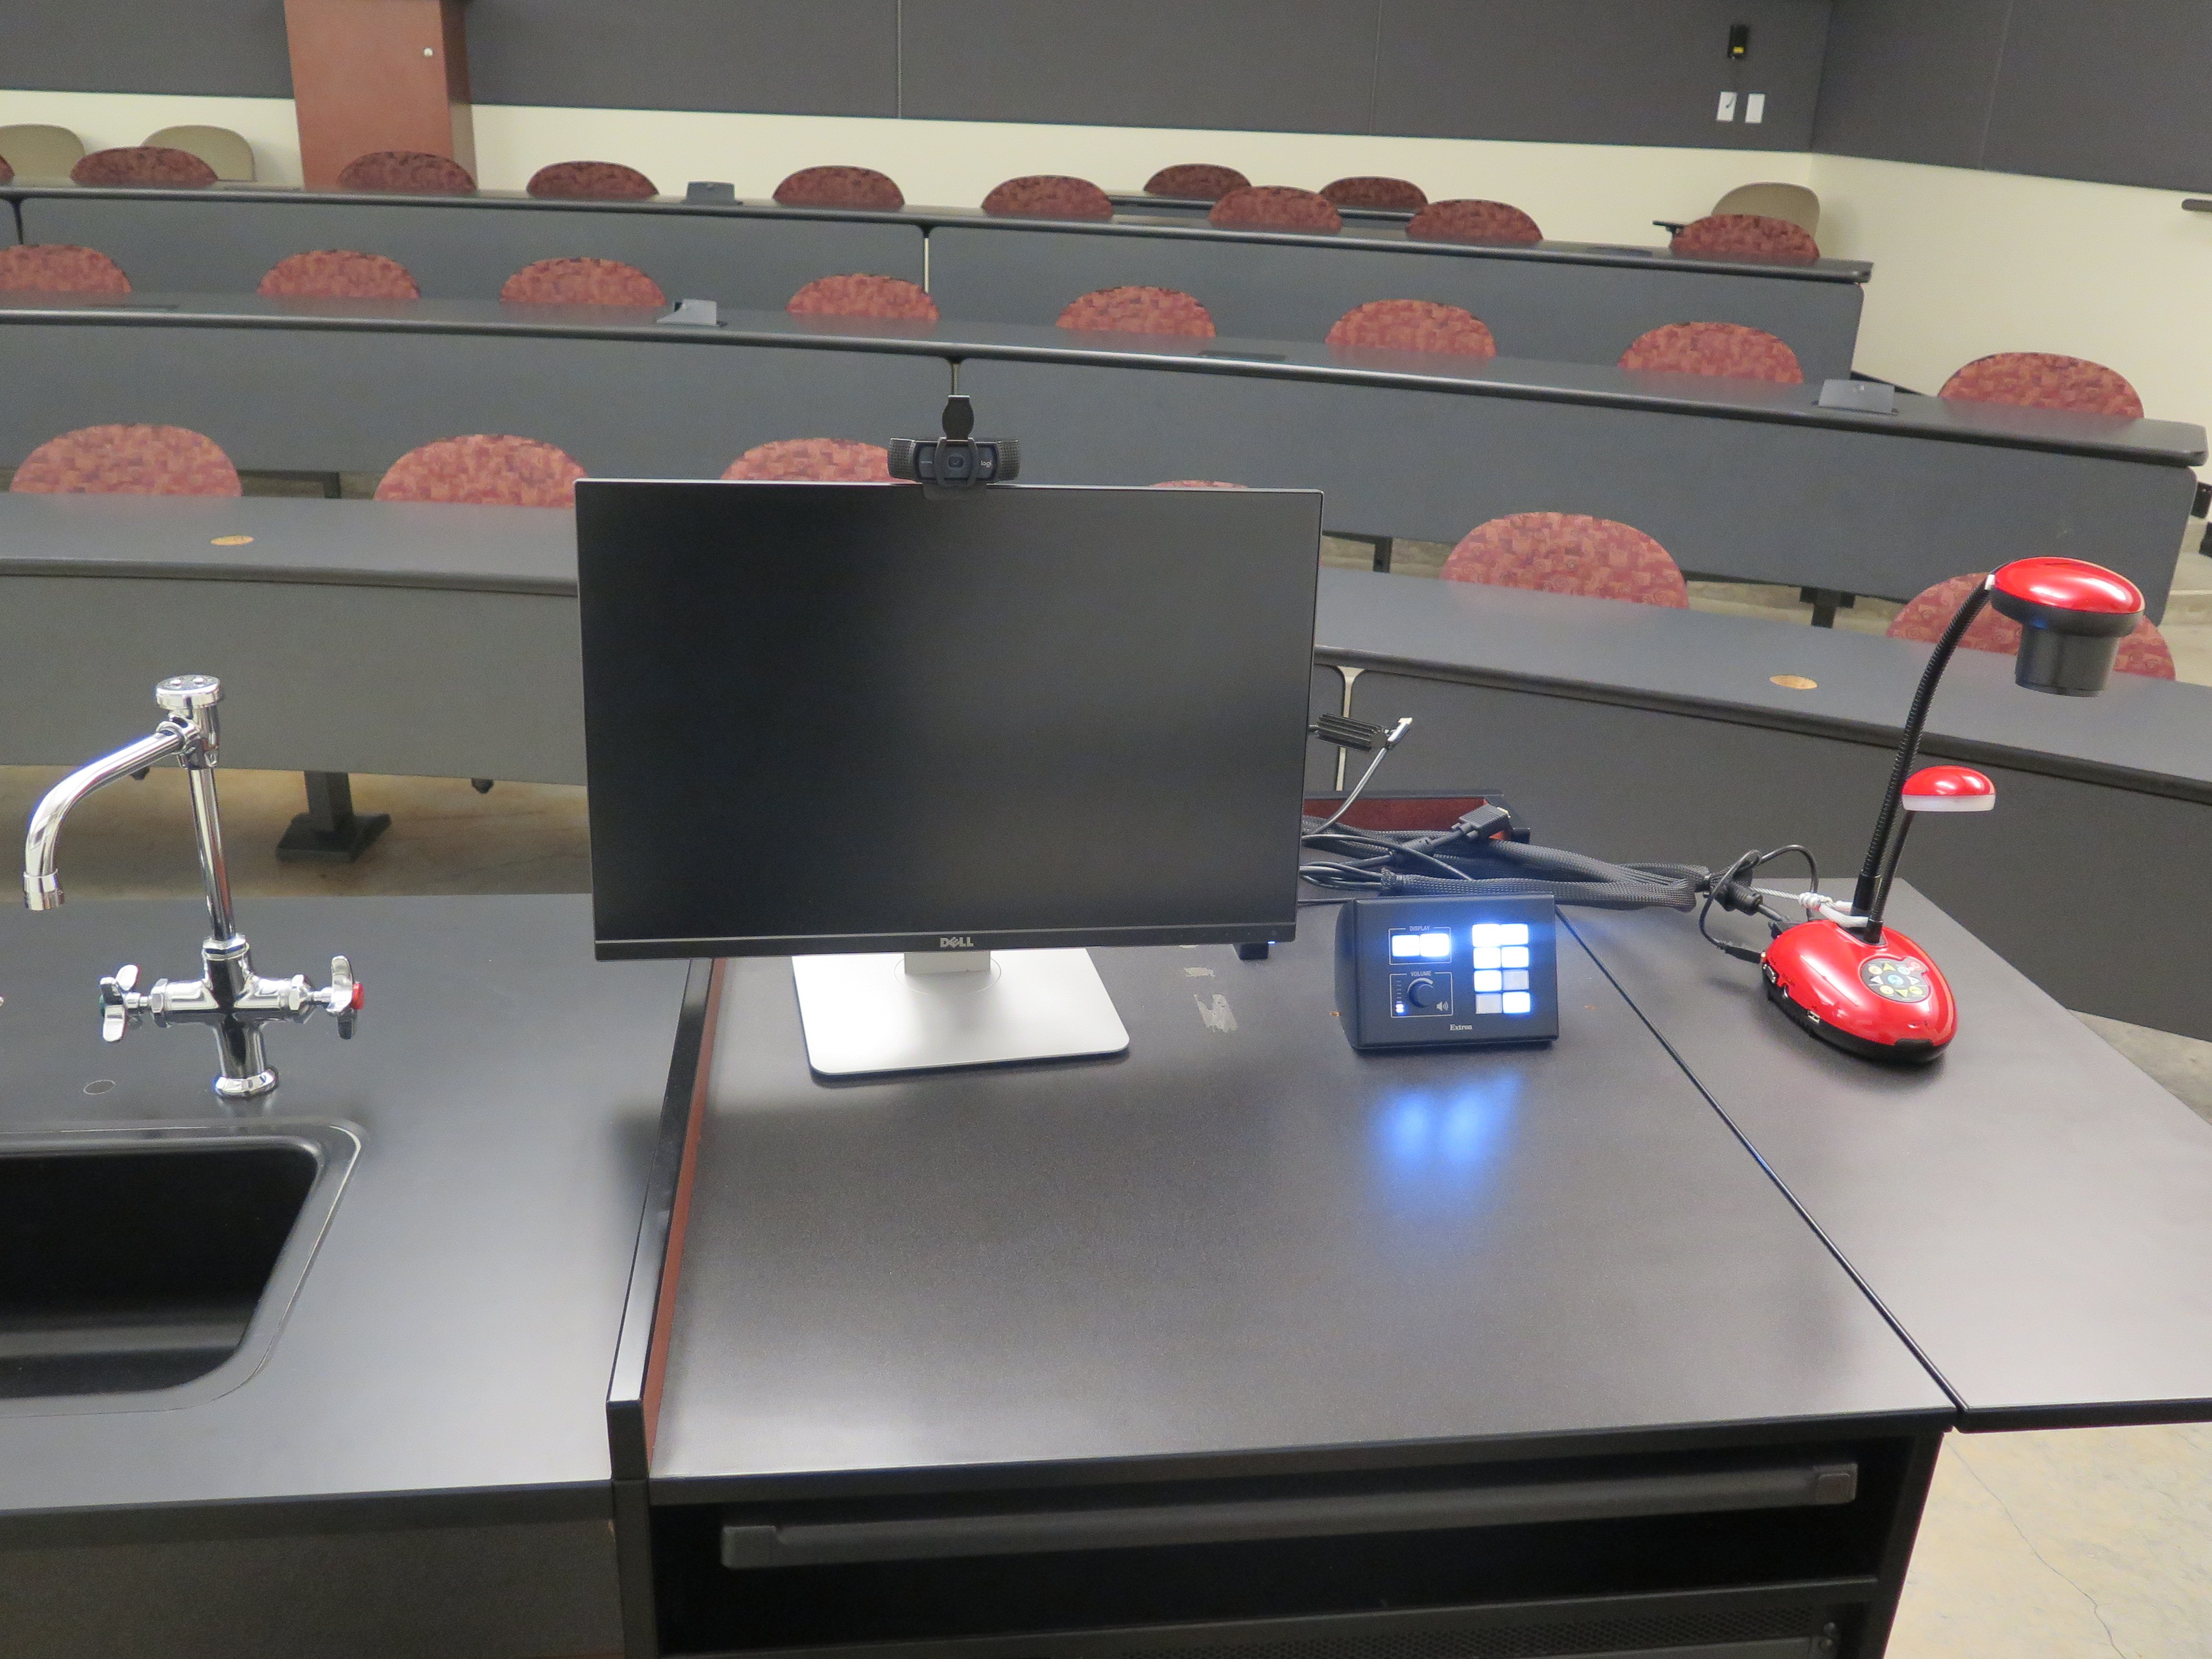 on top of podium is logitech 920 webcam, dell computer monitor, AV push button controller, and lumins ladybug document camera